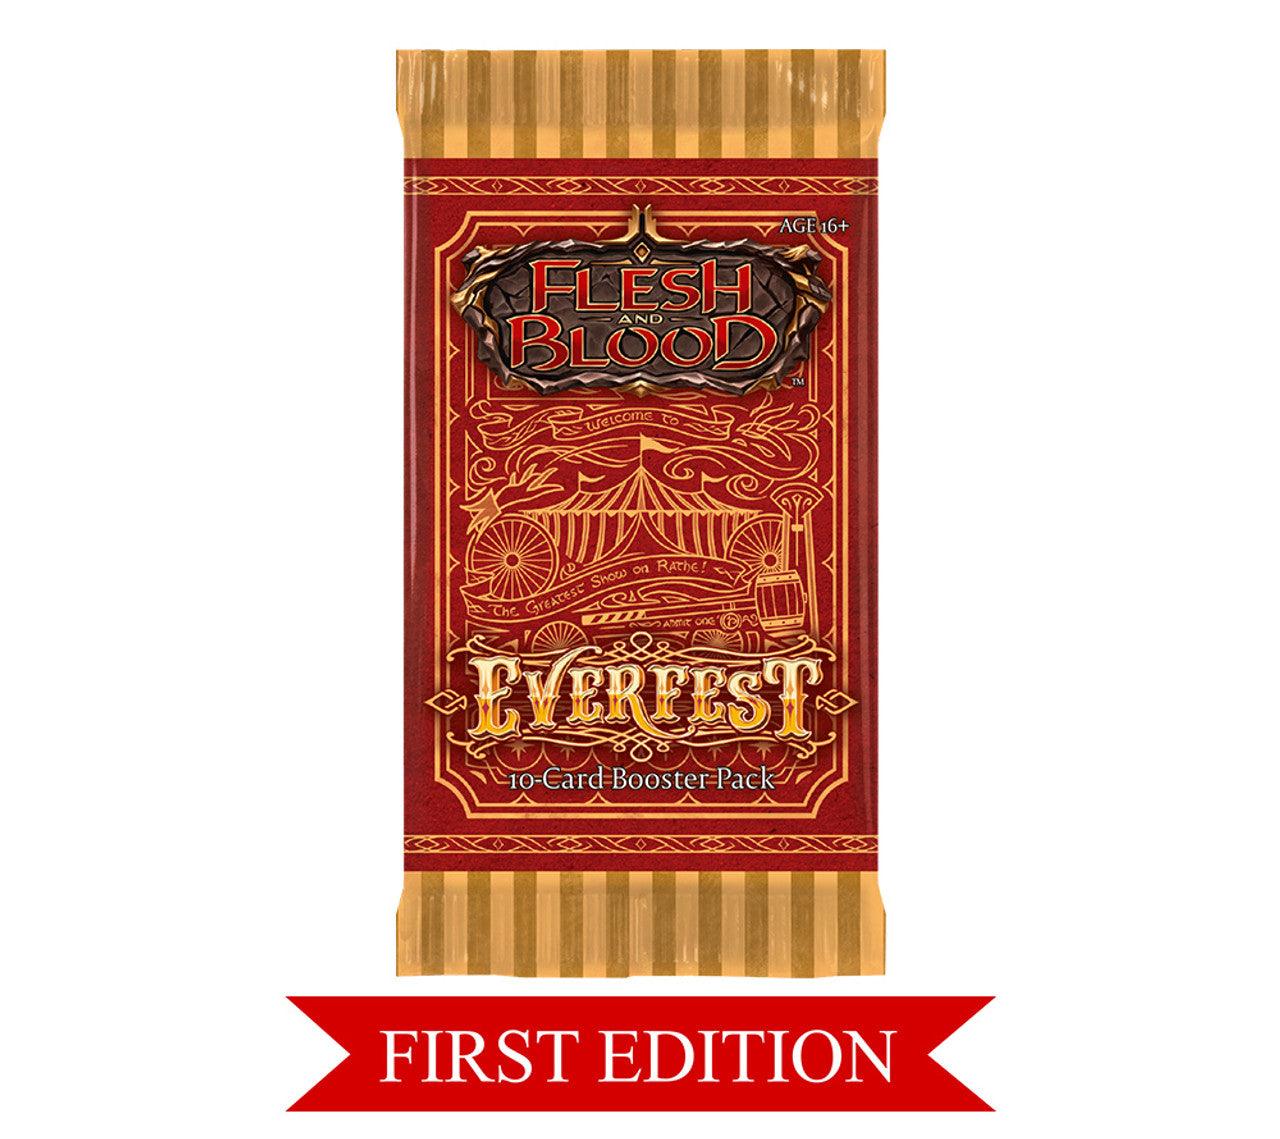 Flesh And Blood - Everfest - 1st Edition - Booster Pack (10 Cards) - Hobby Champion Inc